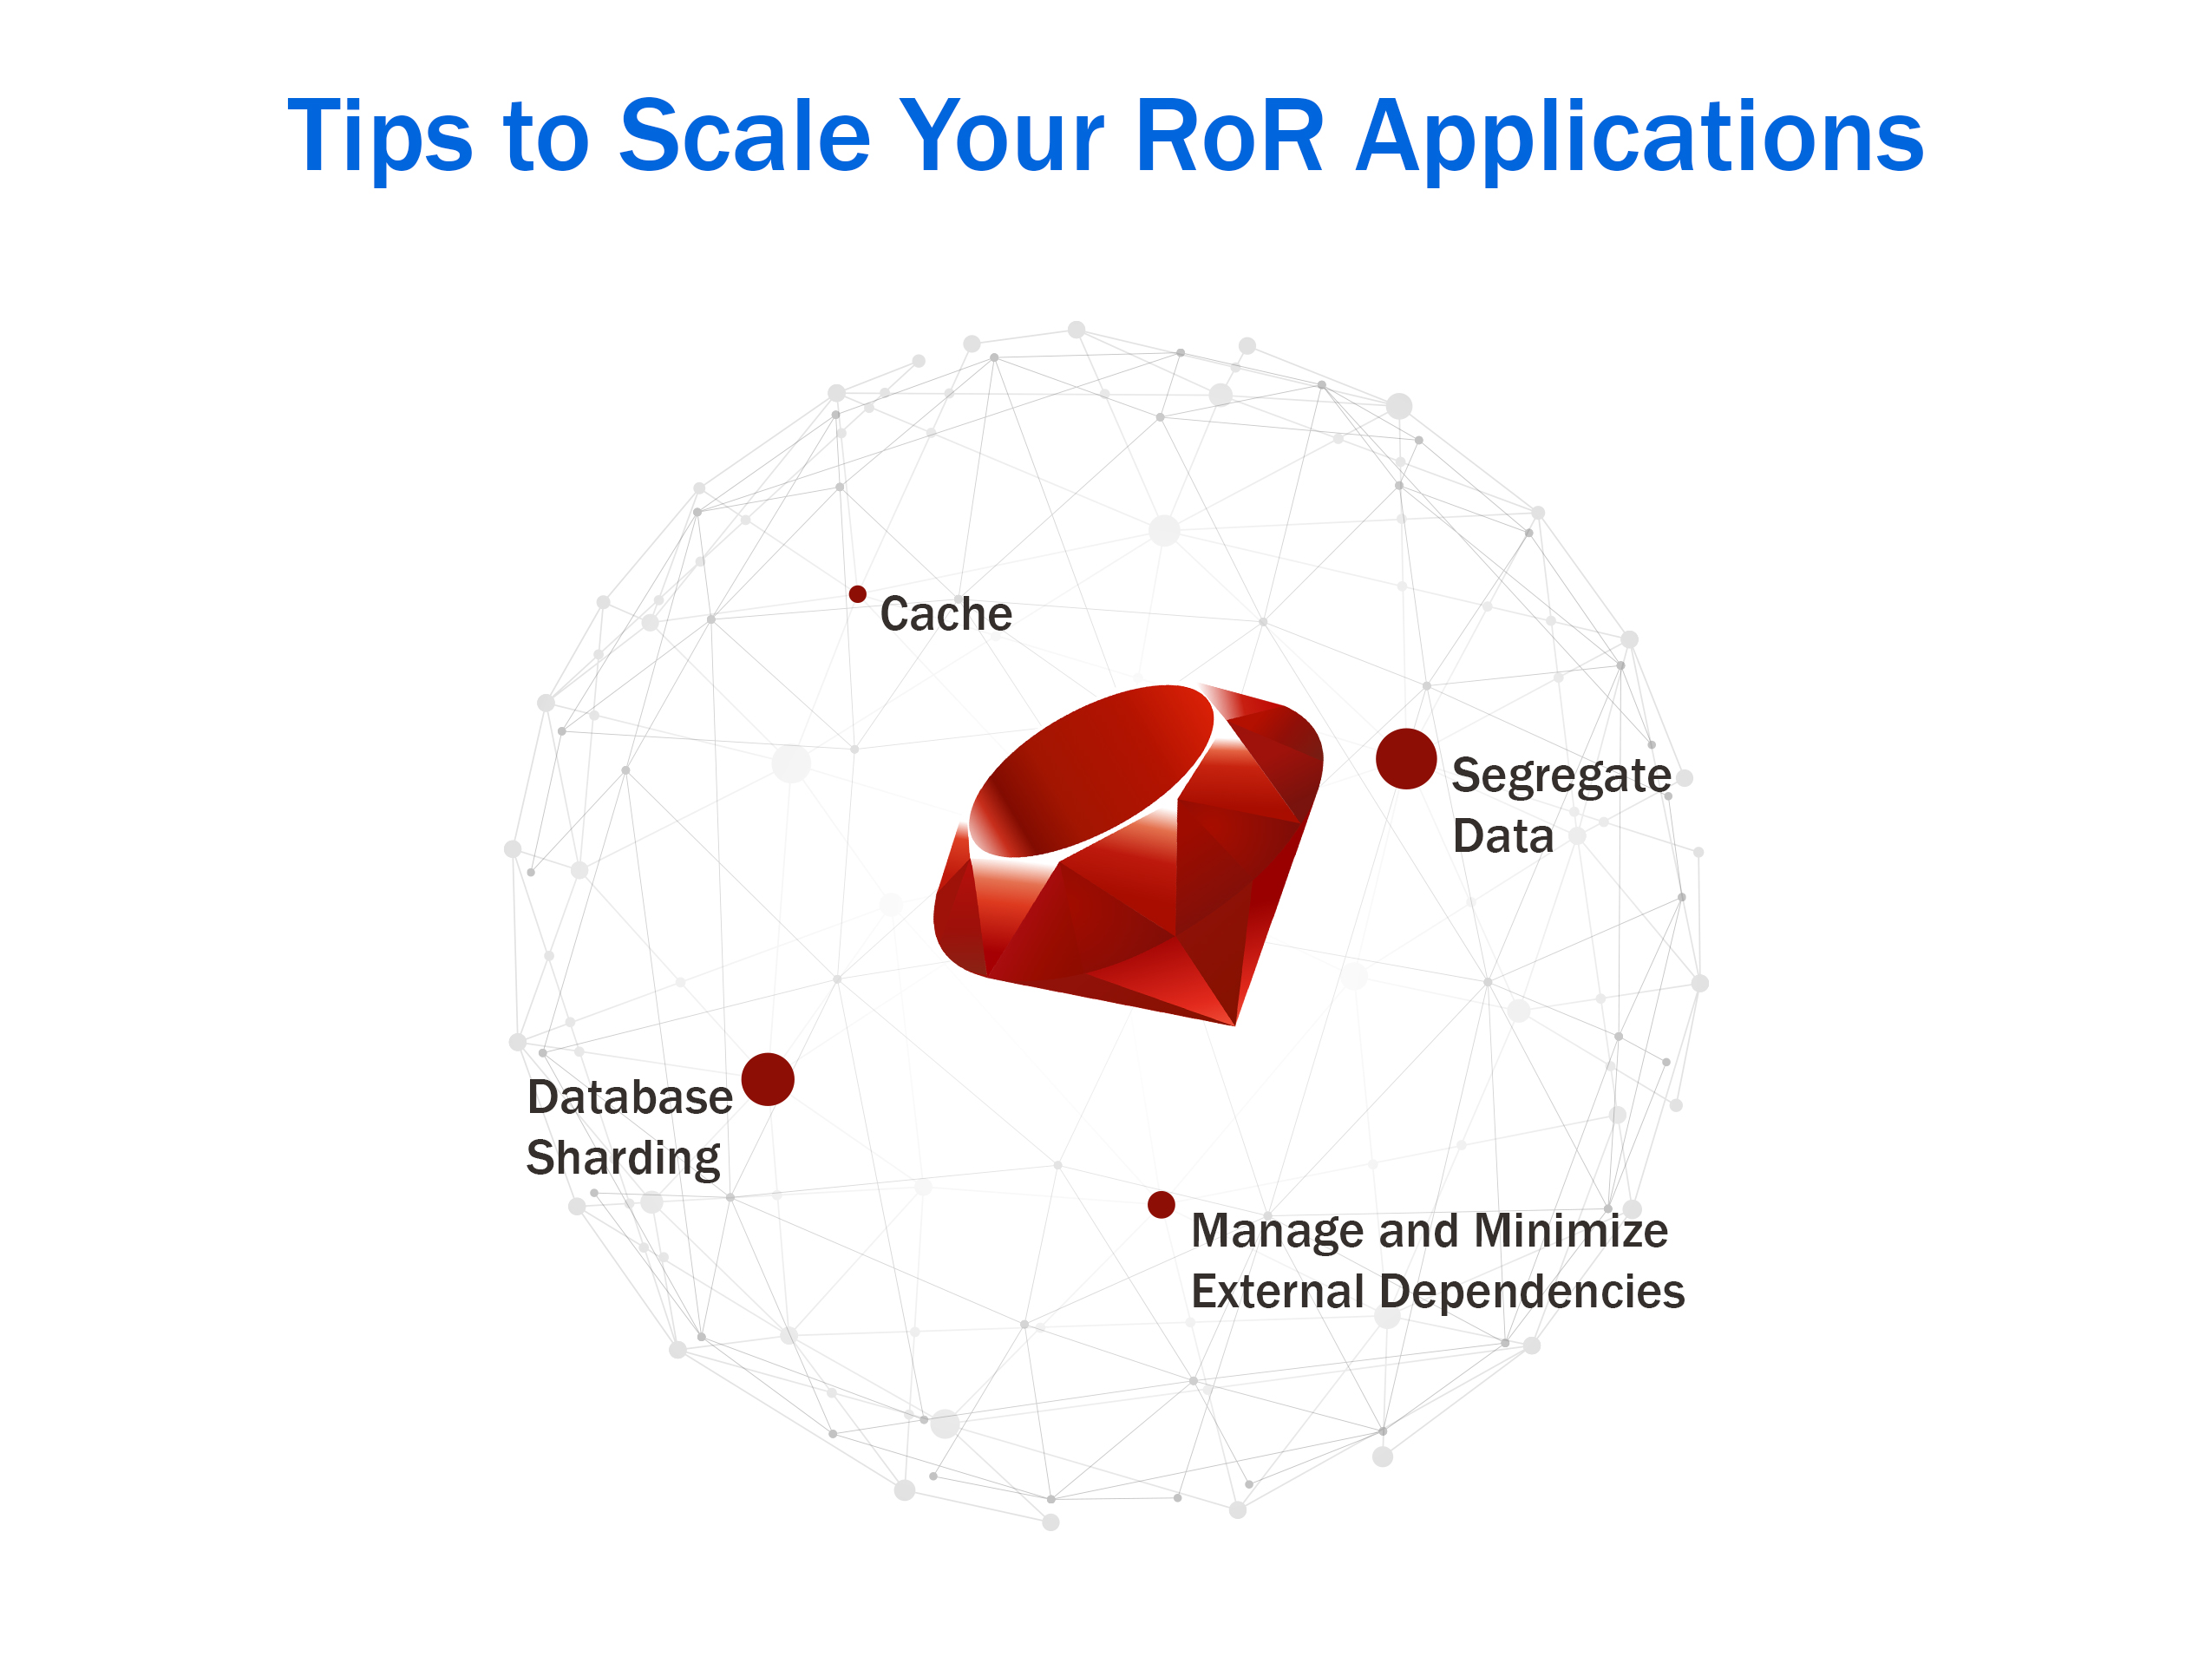 Tips to Scale Your RoR Applications